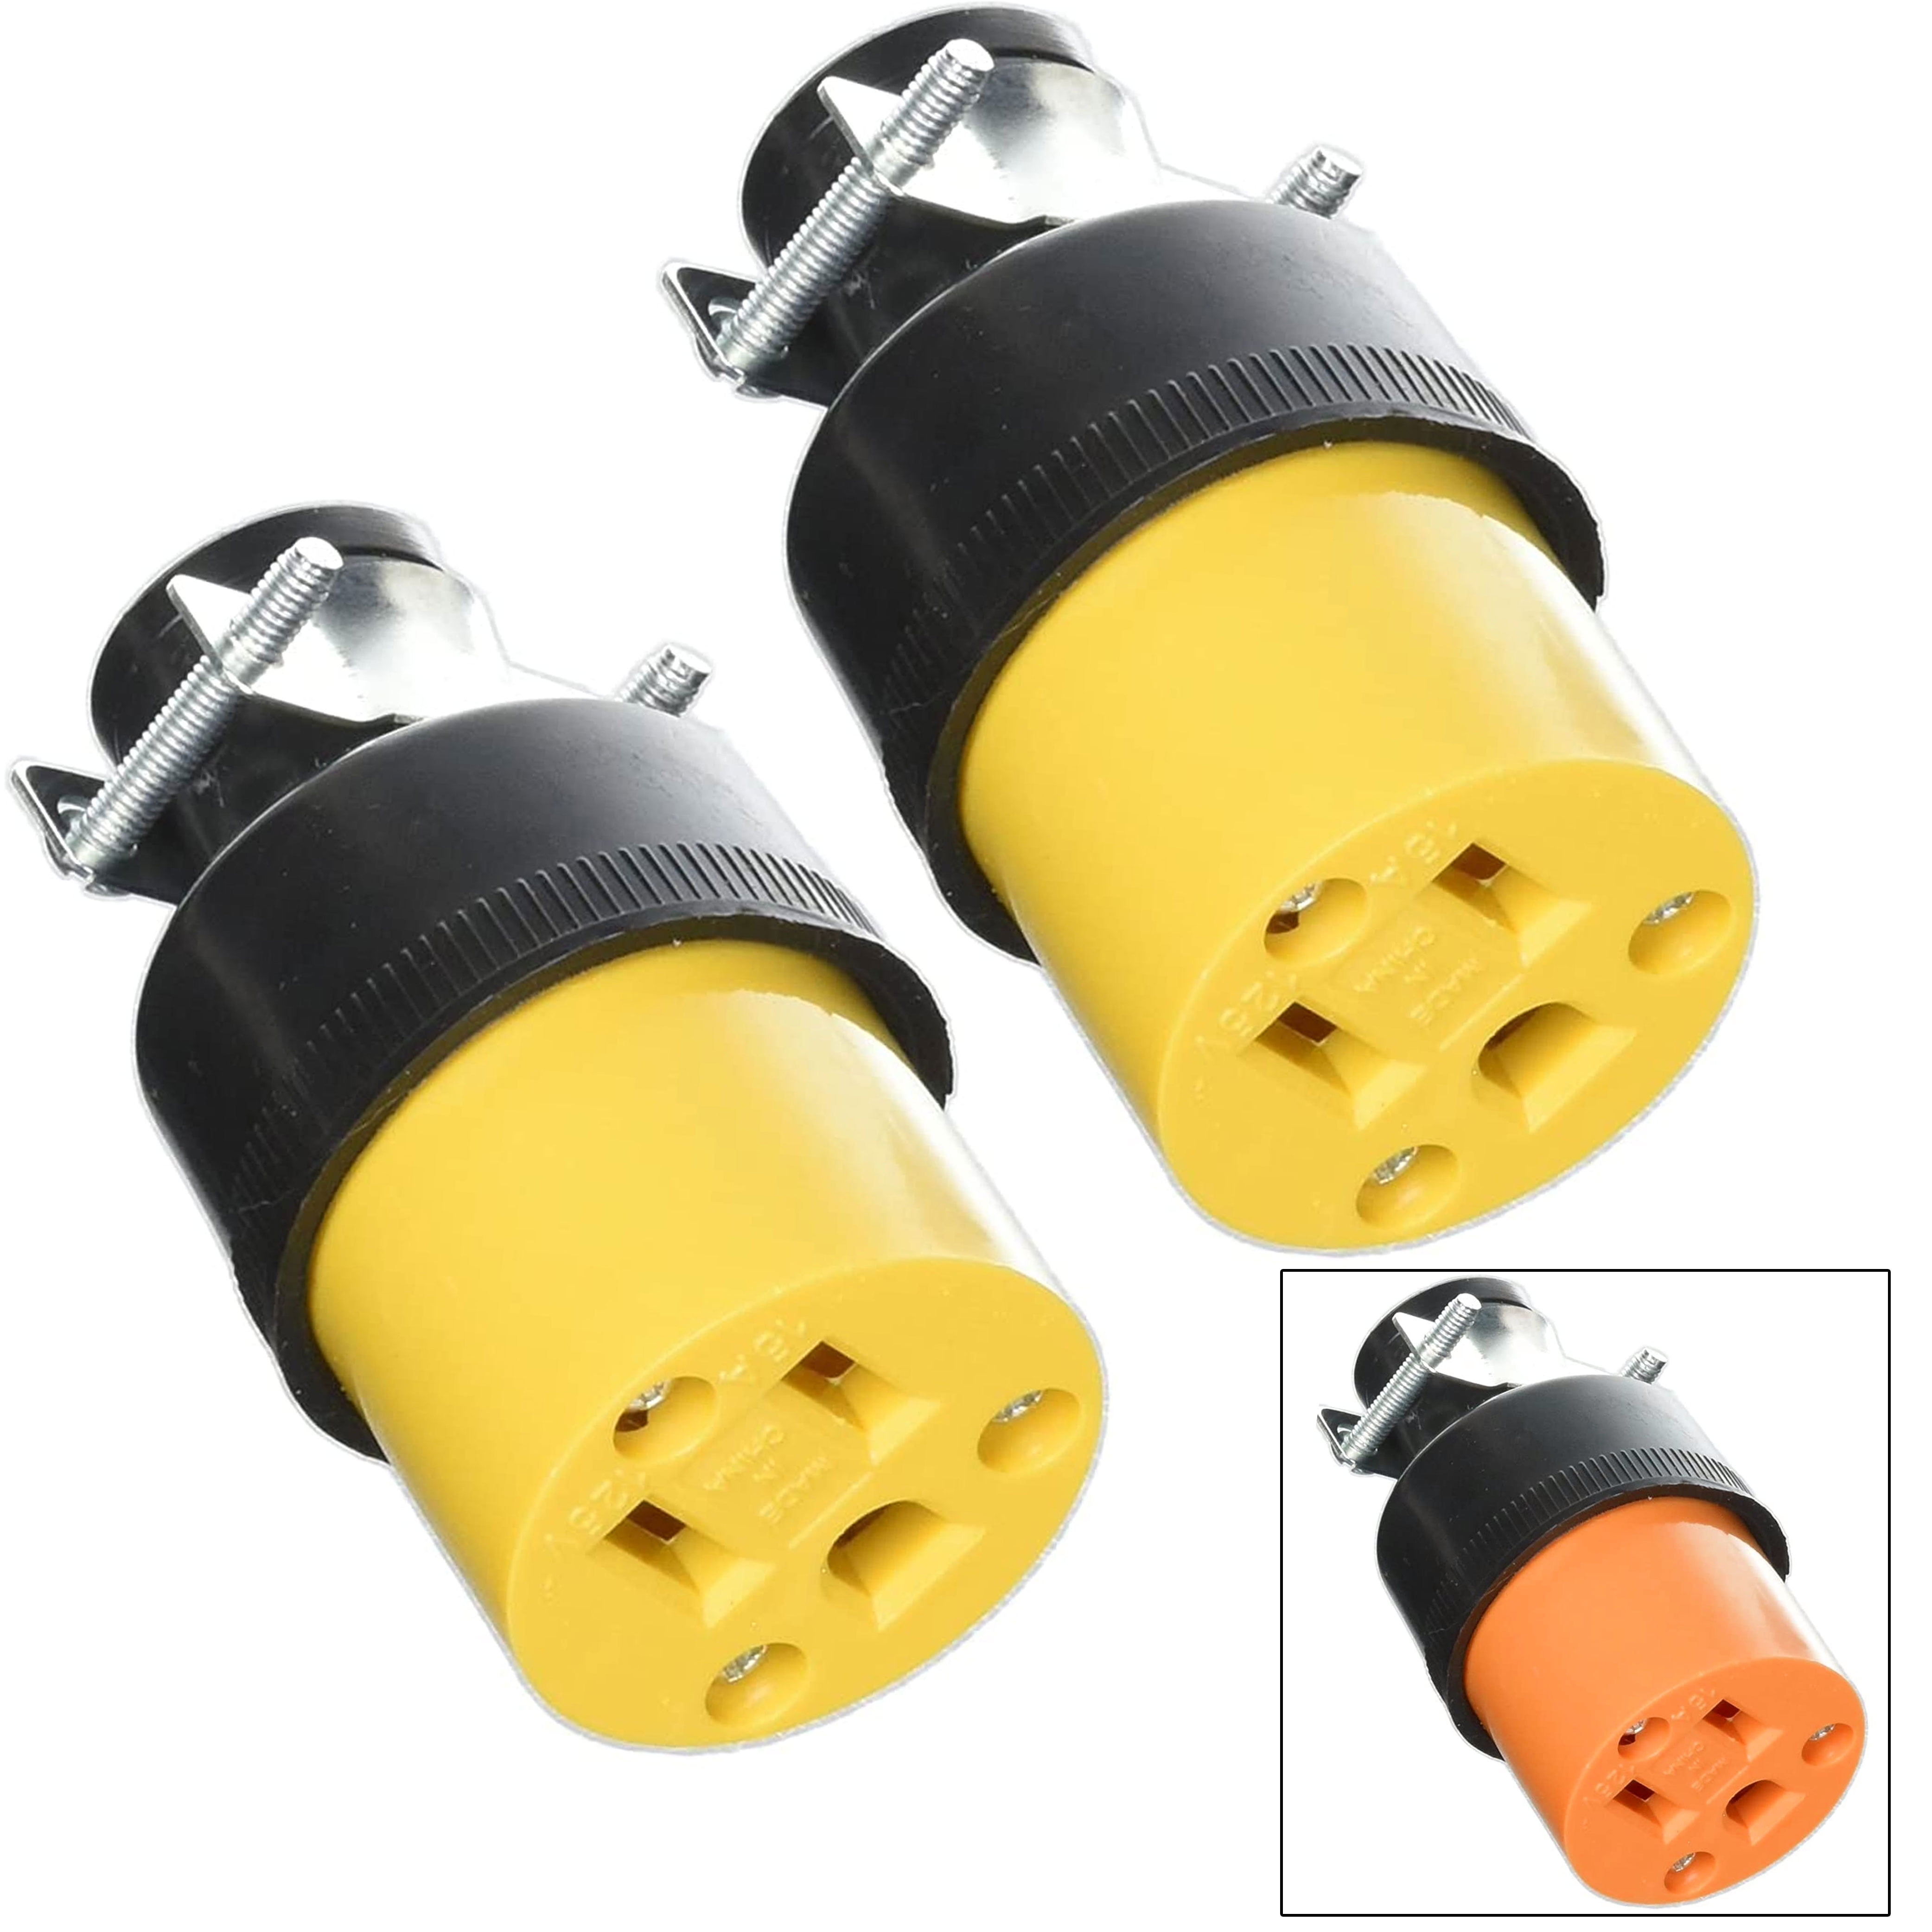 2pc FEMALE Extension Cord Electrical Wire Repair Replacement Plug End 